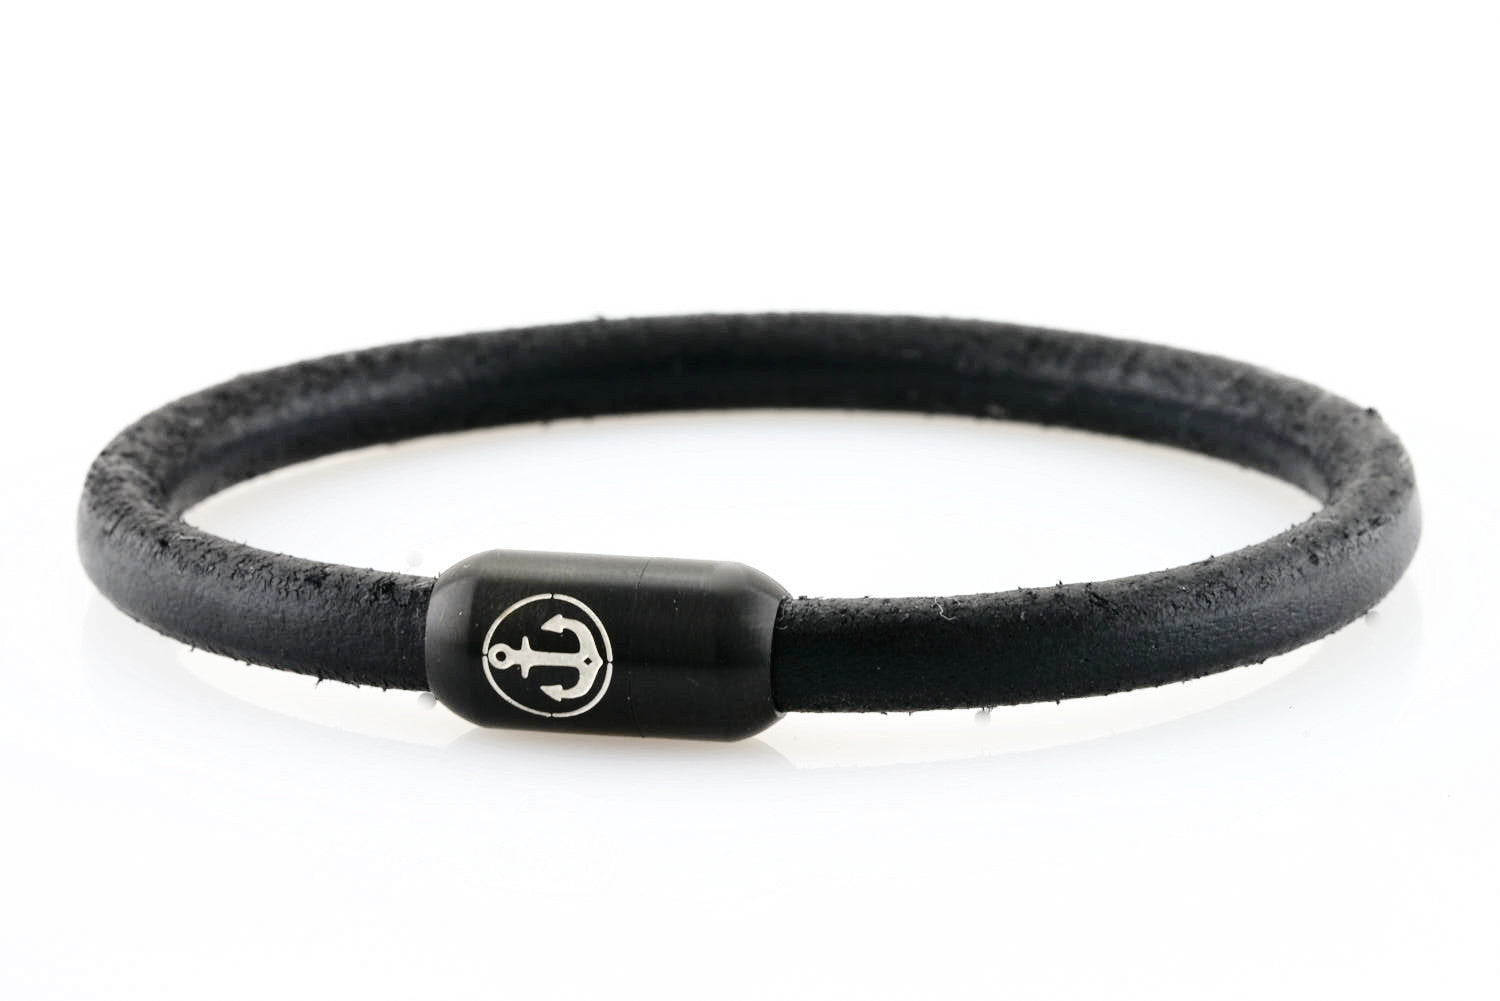 Solid Black leather bracelet for men with black stainless steel clasp with anchor engraving - NEPTN